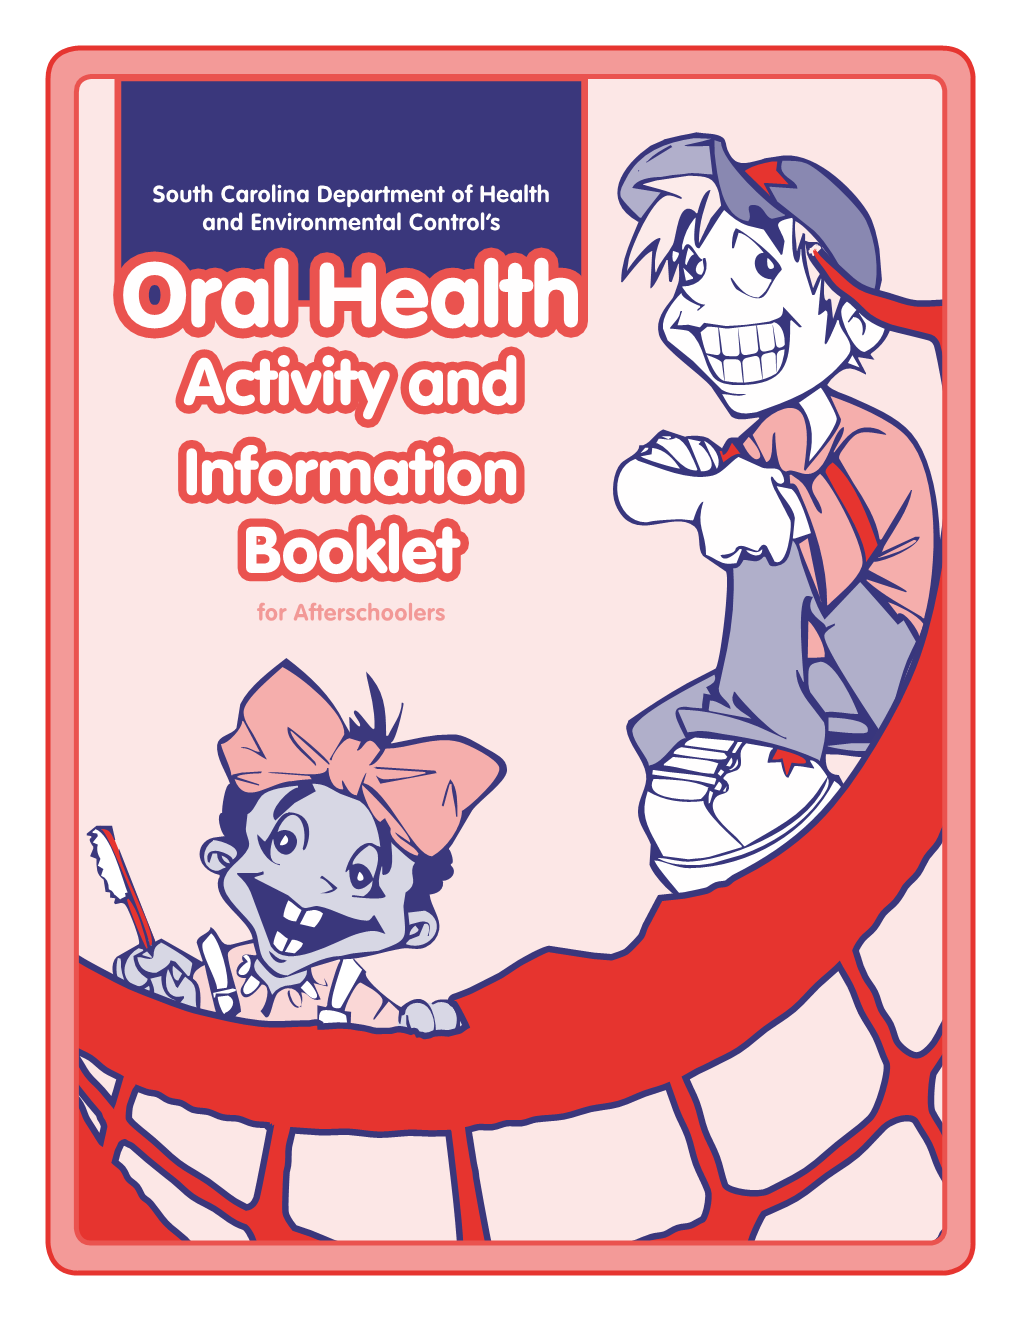 Oral Health Activity and Information Booklet for Afterschoolers